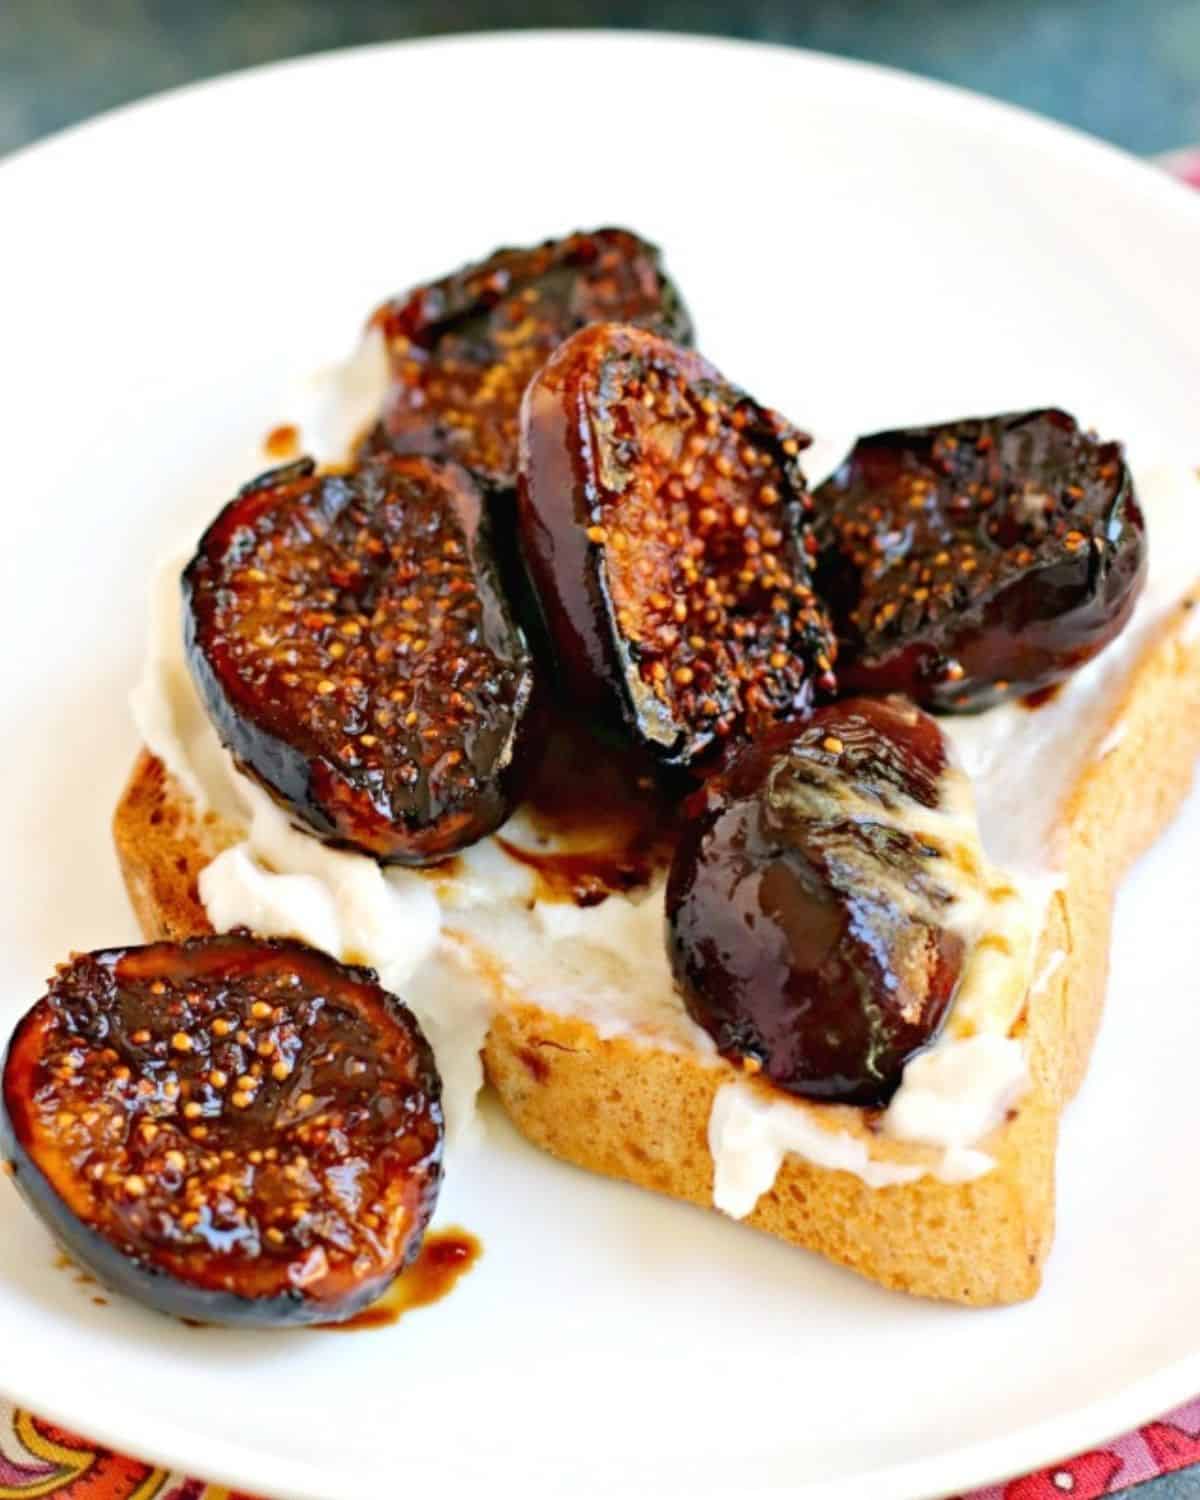 Slice of toast with cream cheese and figs